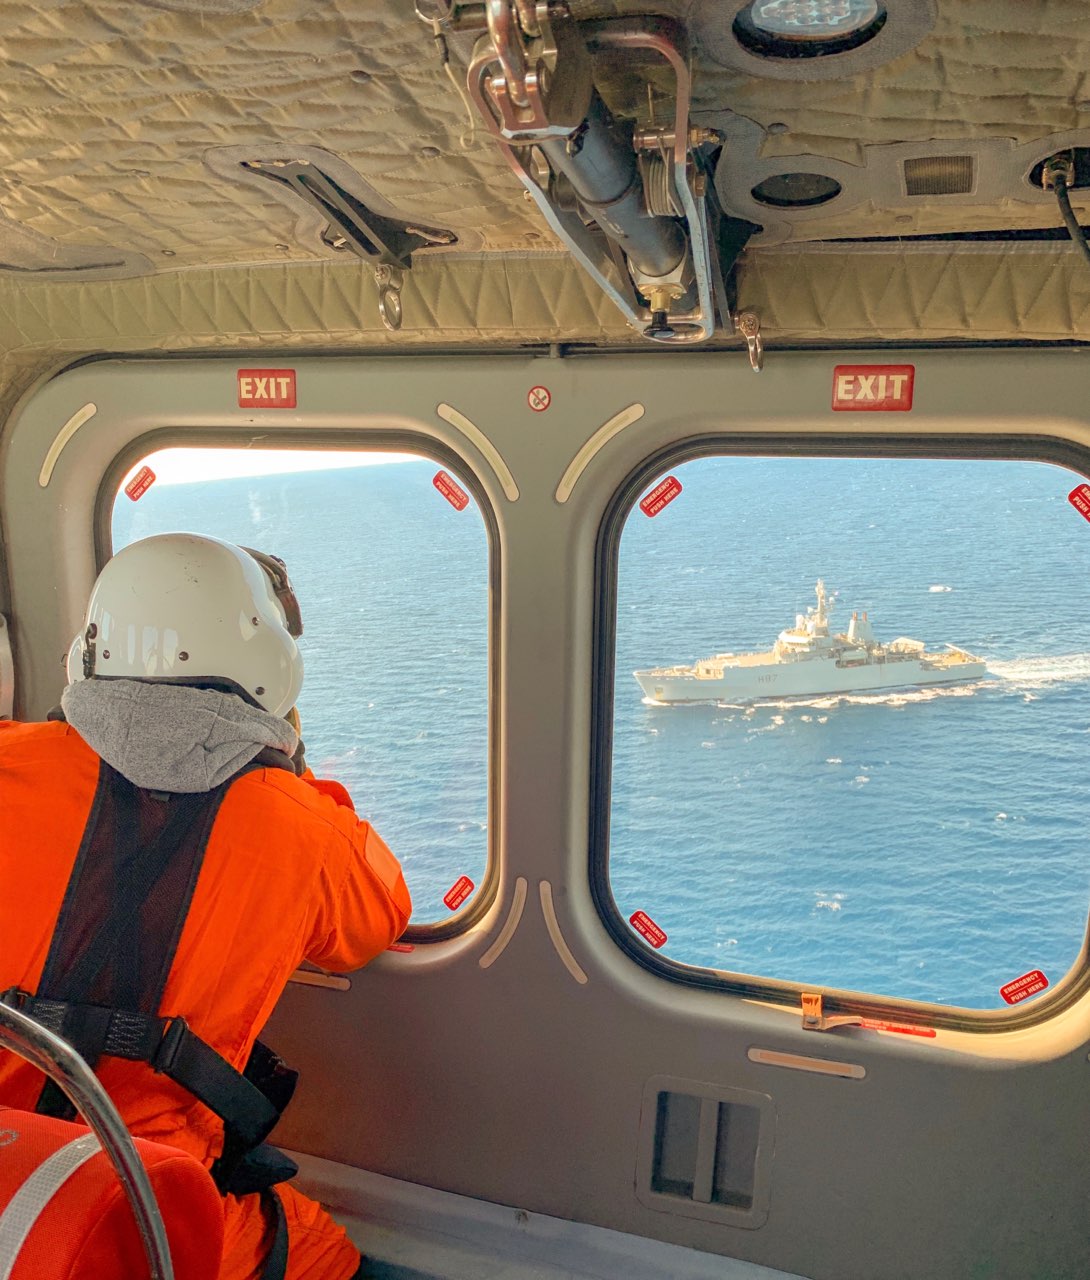 Joint Search and Rescue (SAR) Exercise
SAREX “CYPUK - 01/19”